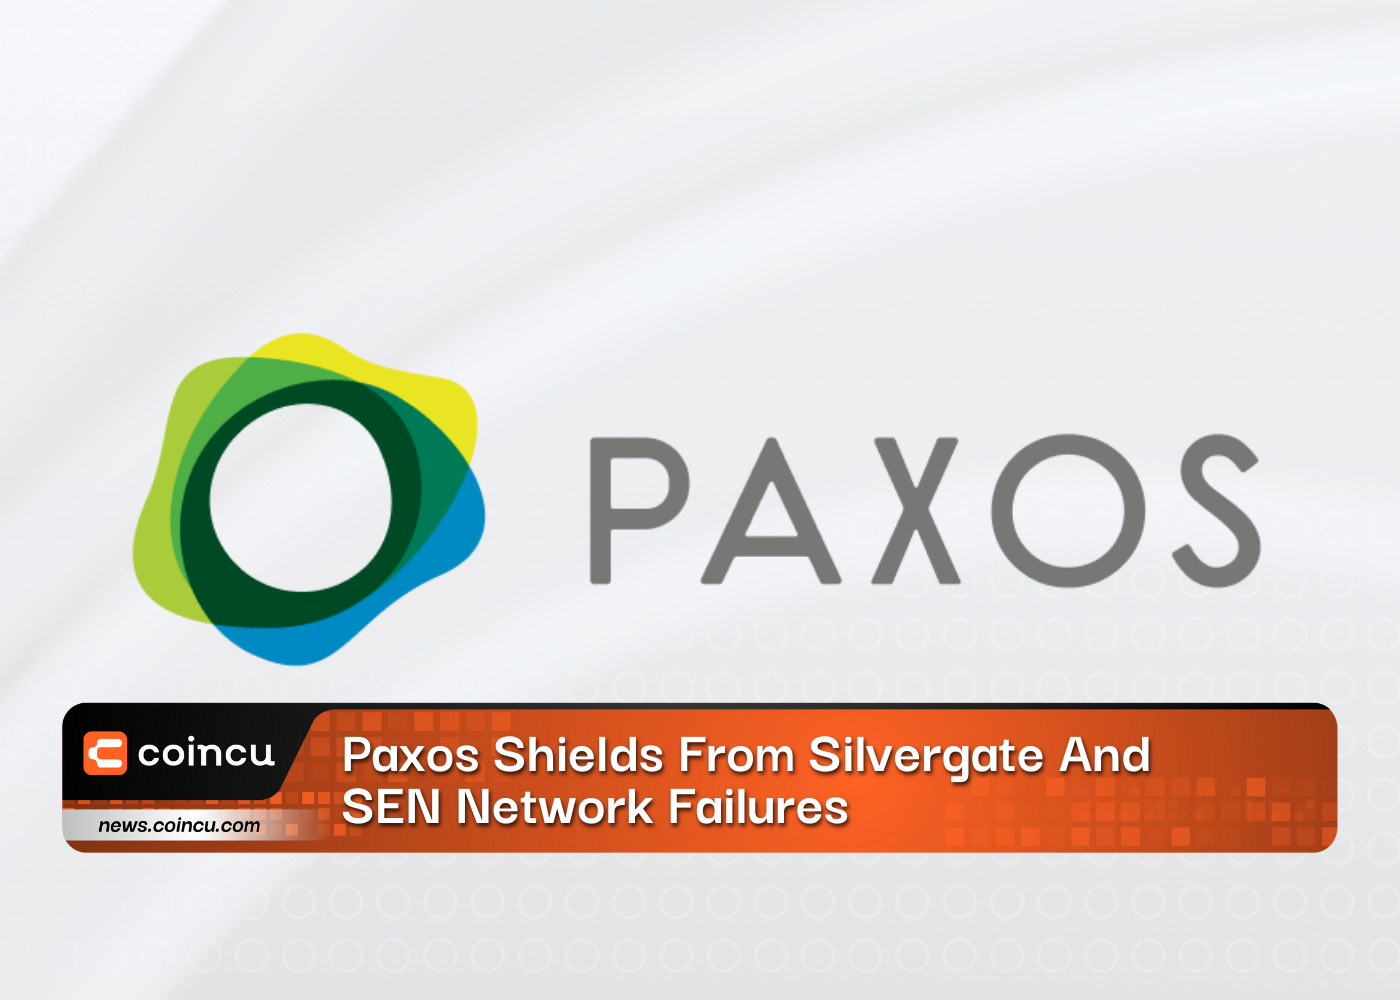 Paxos Shields From Silvergate And